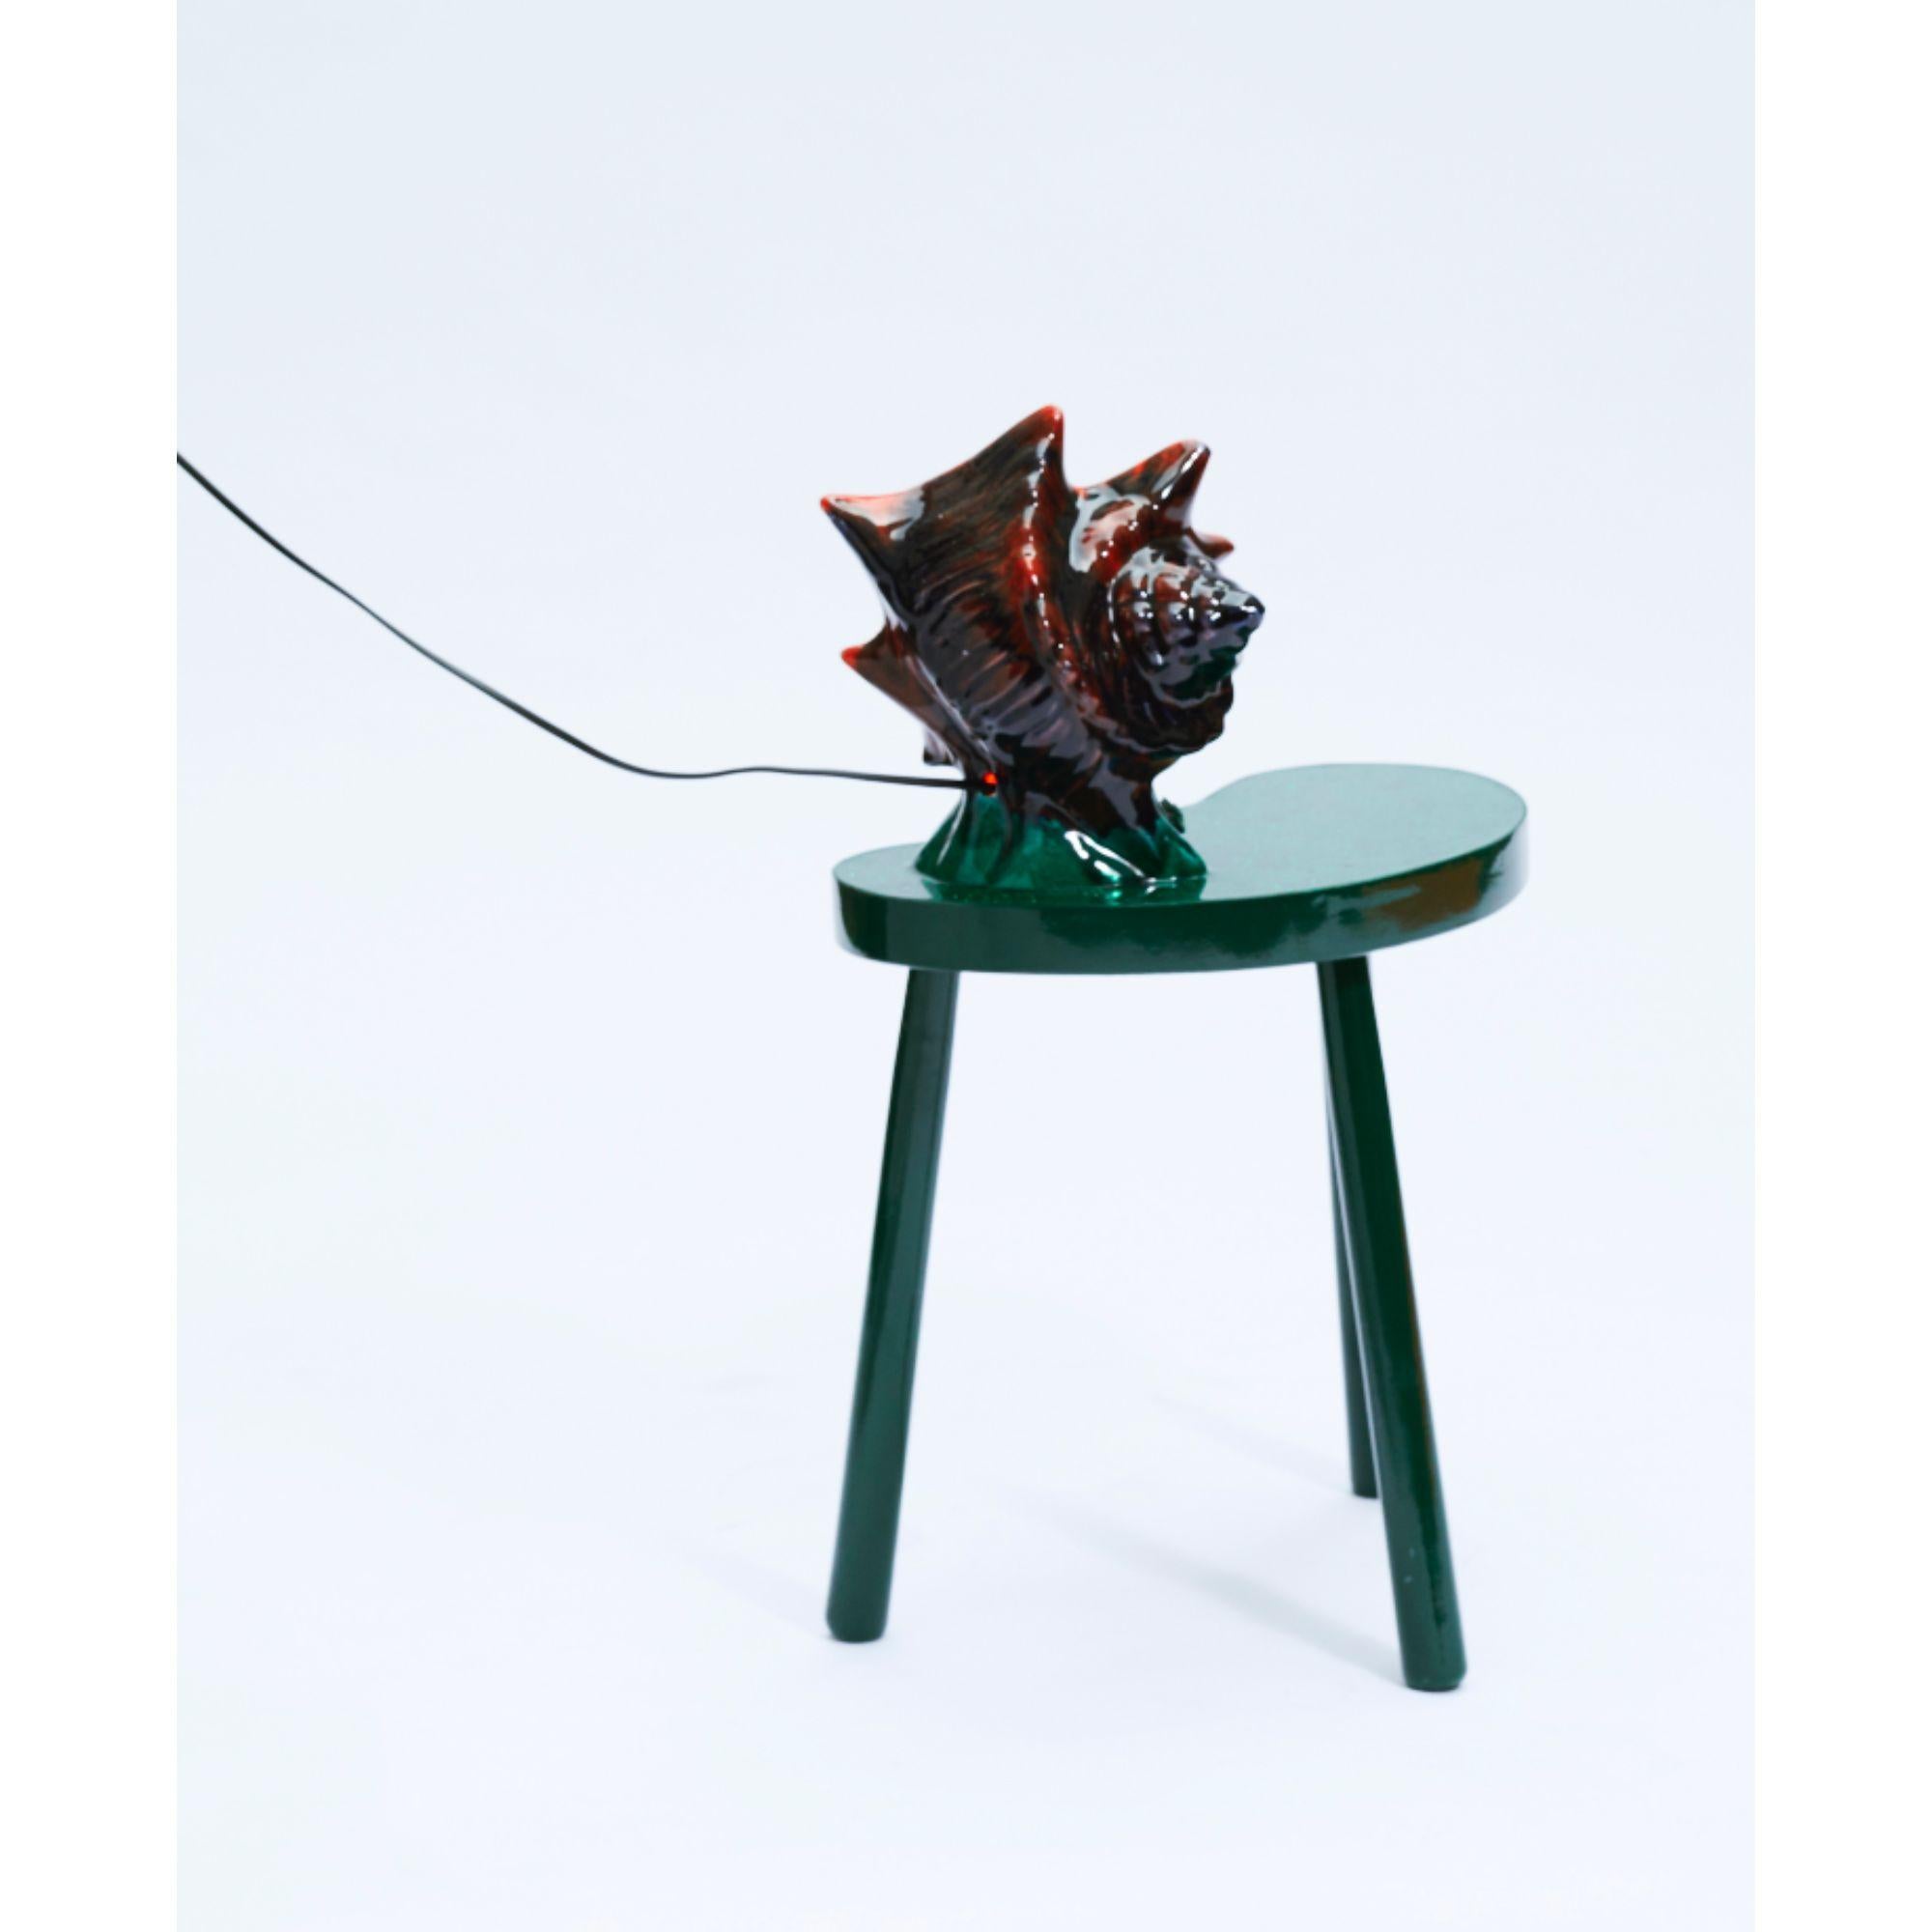 The Bisou stool was designed for the 2022 Under the Sea exhibition at Maison Lapparra in Paris. Constructed from solid wood, the piece combines two different crafts: resin and ceramics. Made in Paris by master painters, the piece is covered with a